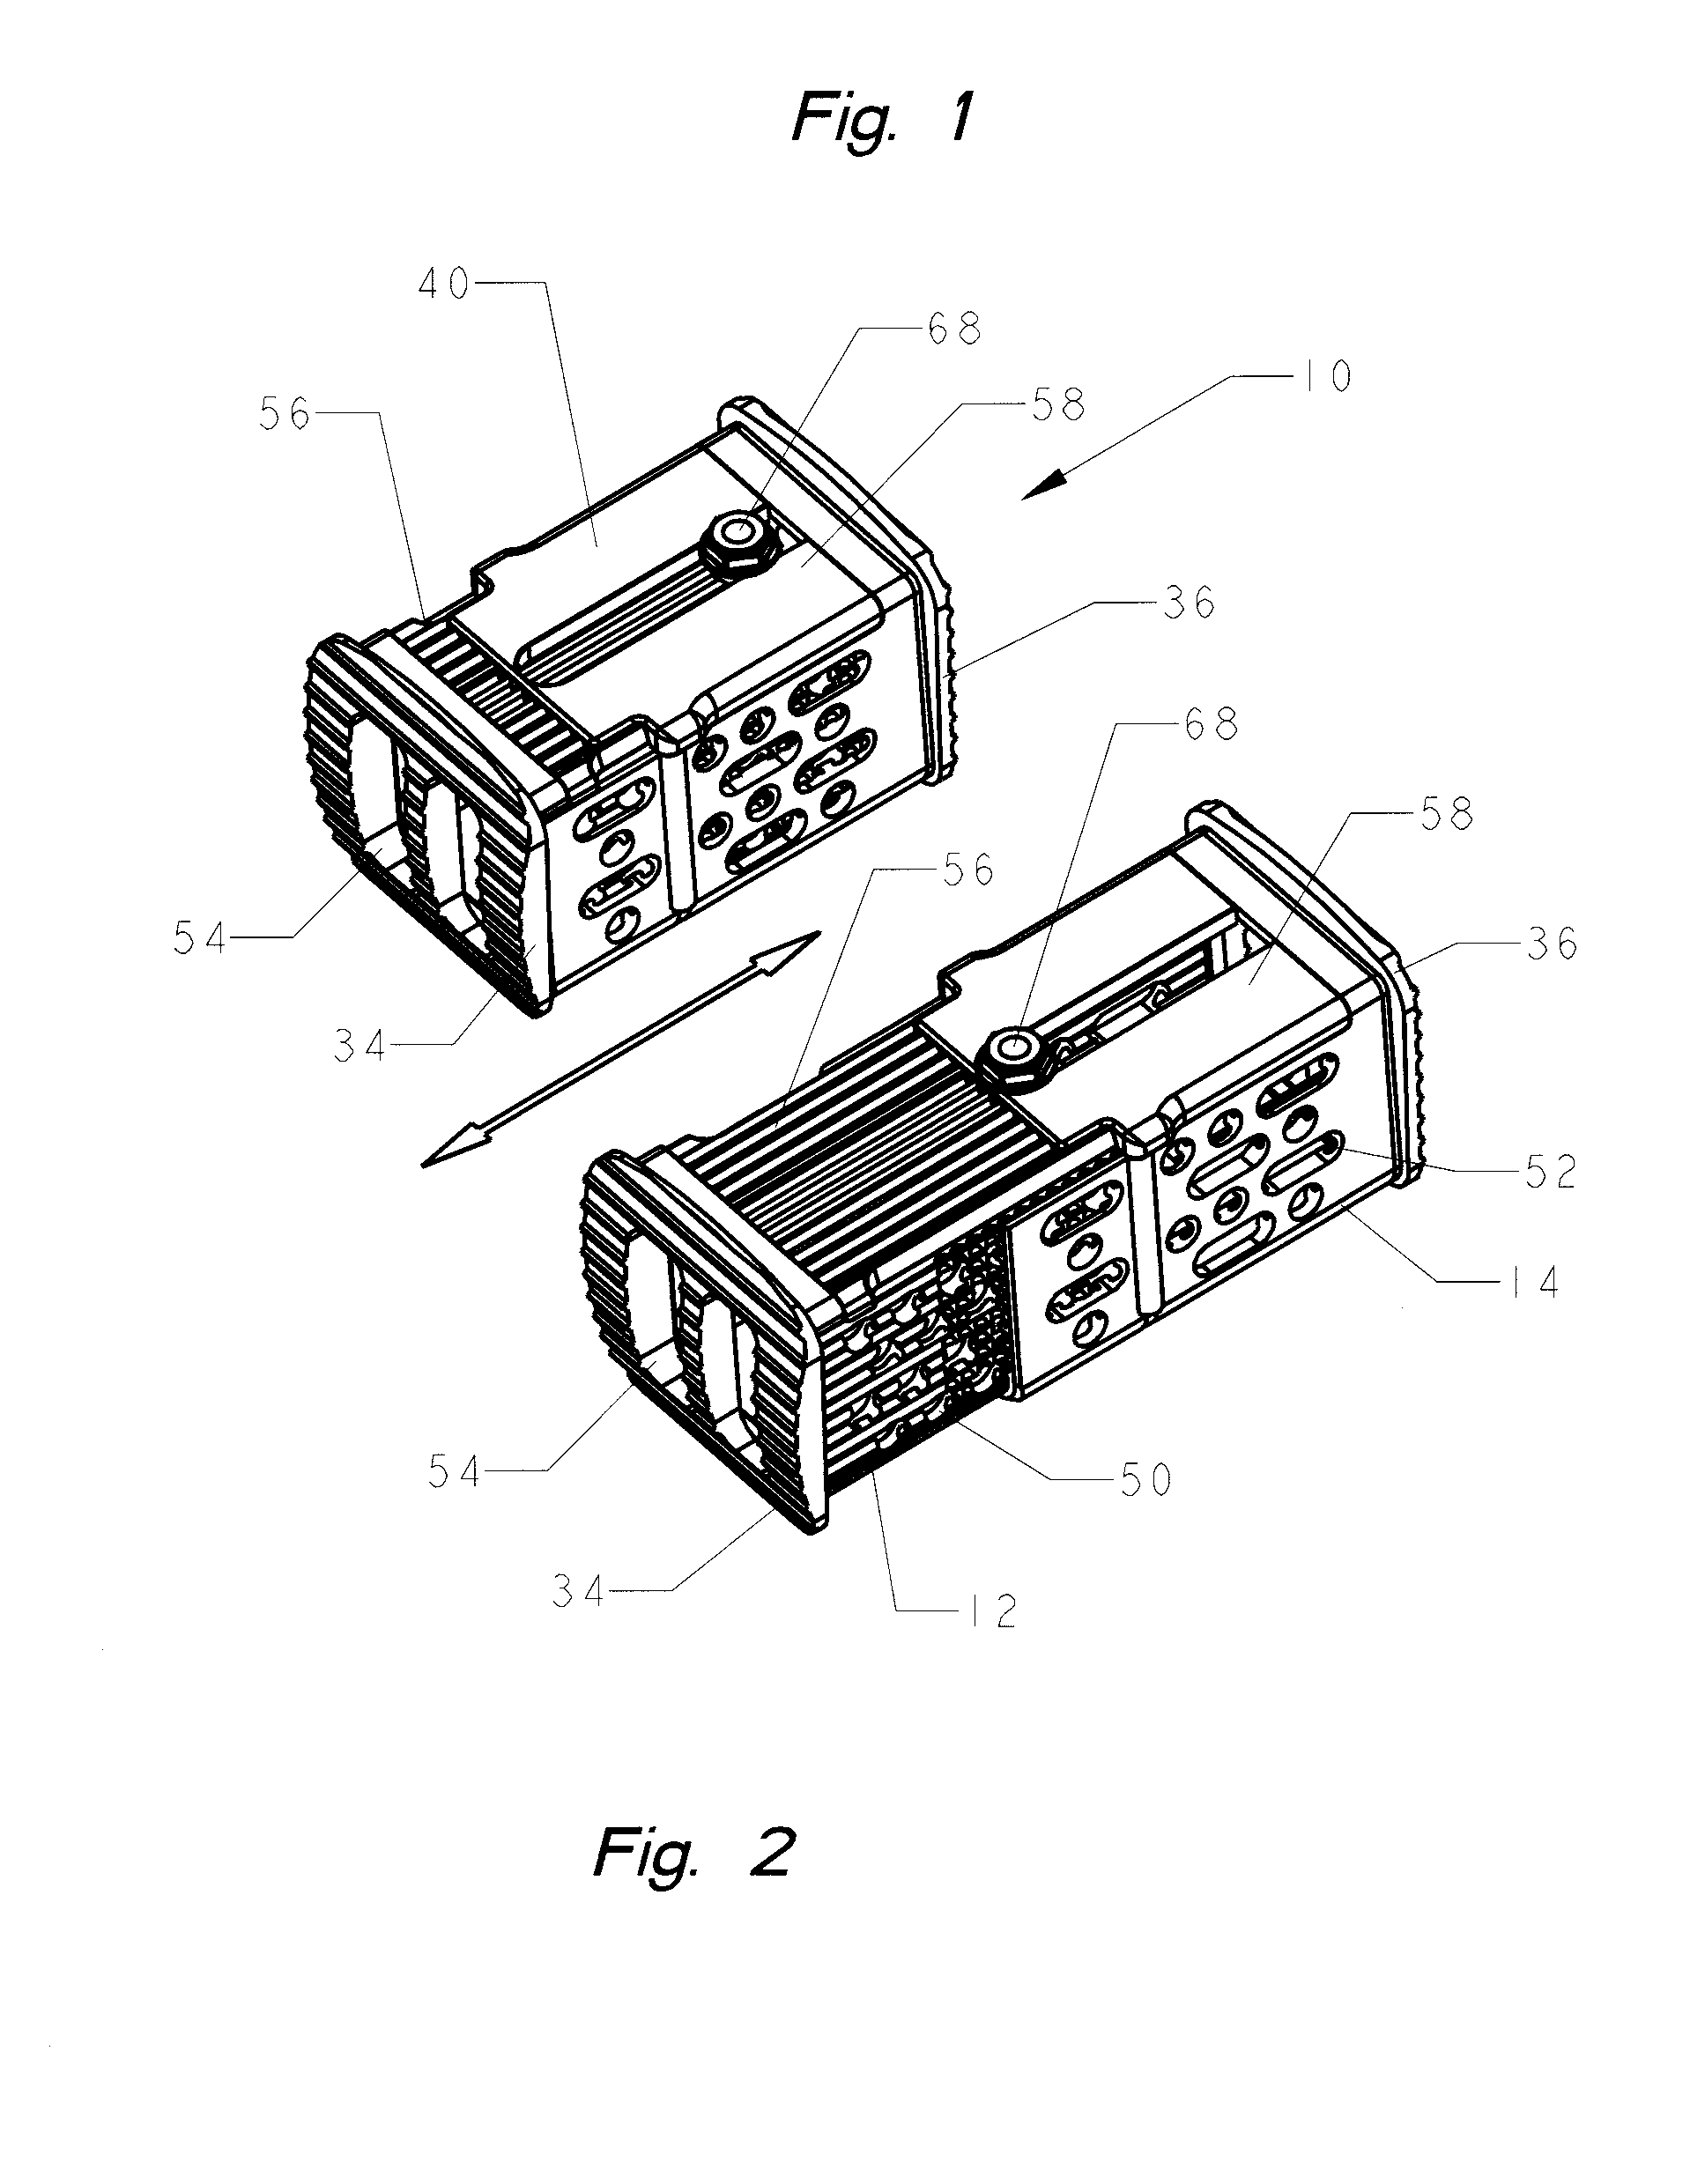 Expandable corpectomy device